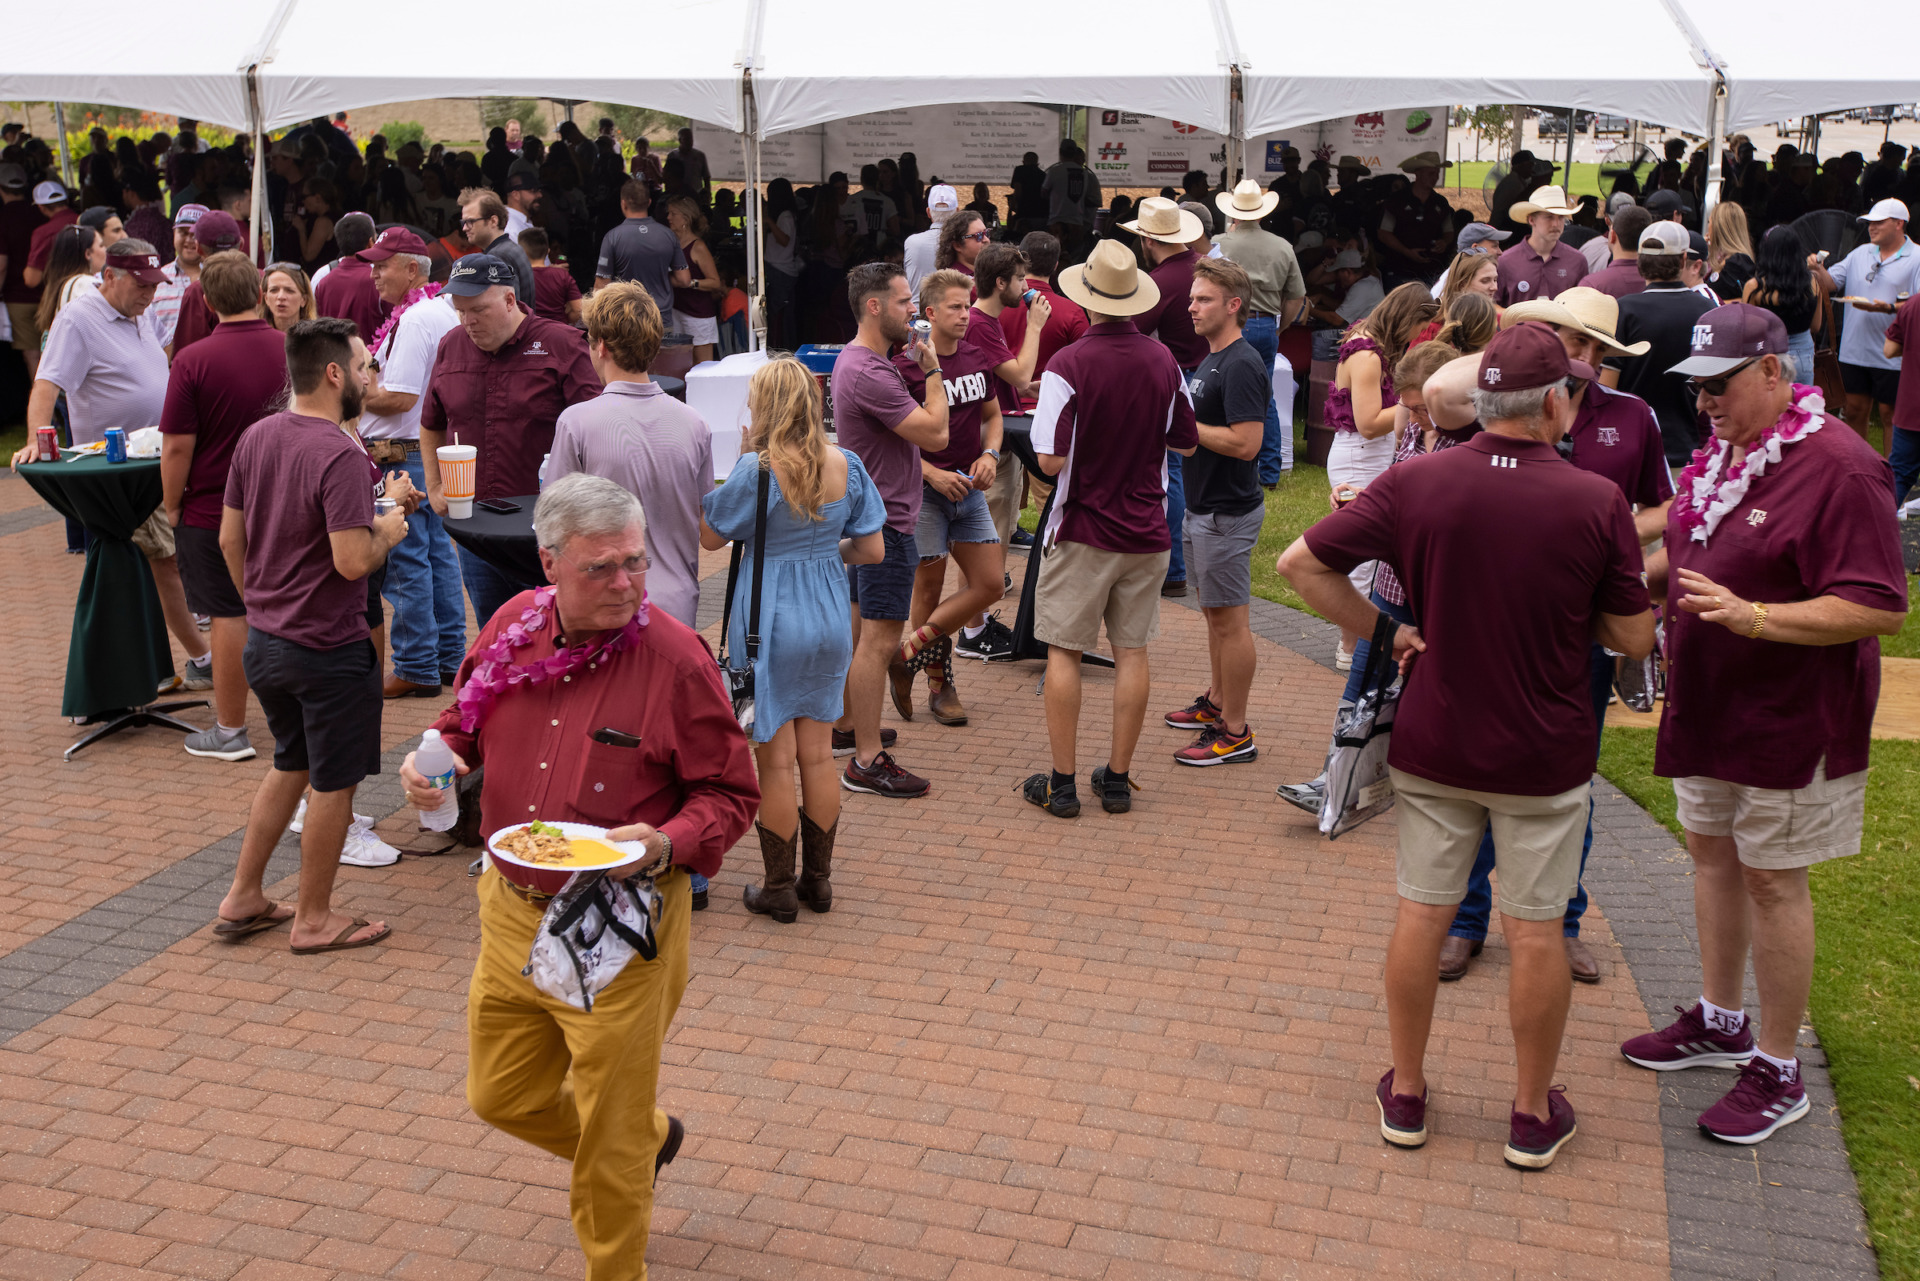 Tailgate season in Texas is a great time to enjoy football, friends and family while practicing food safety. (Texas A&M AgriLife photo by Michael Miller)